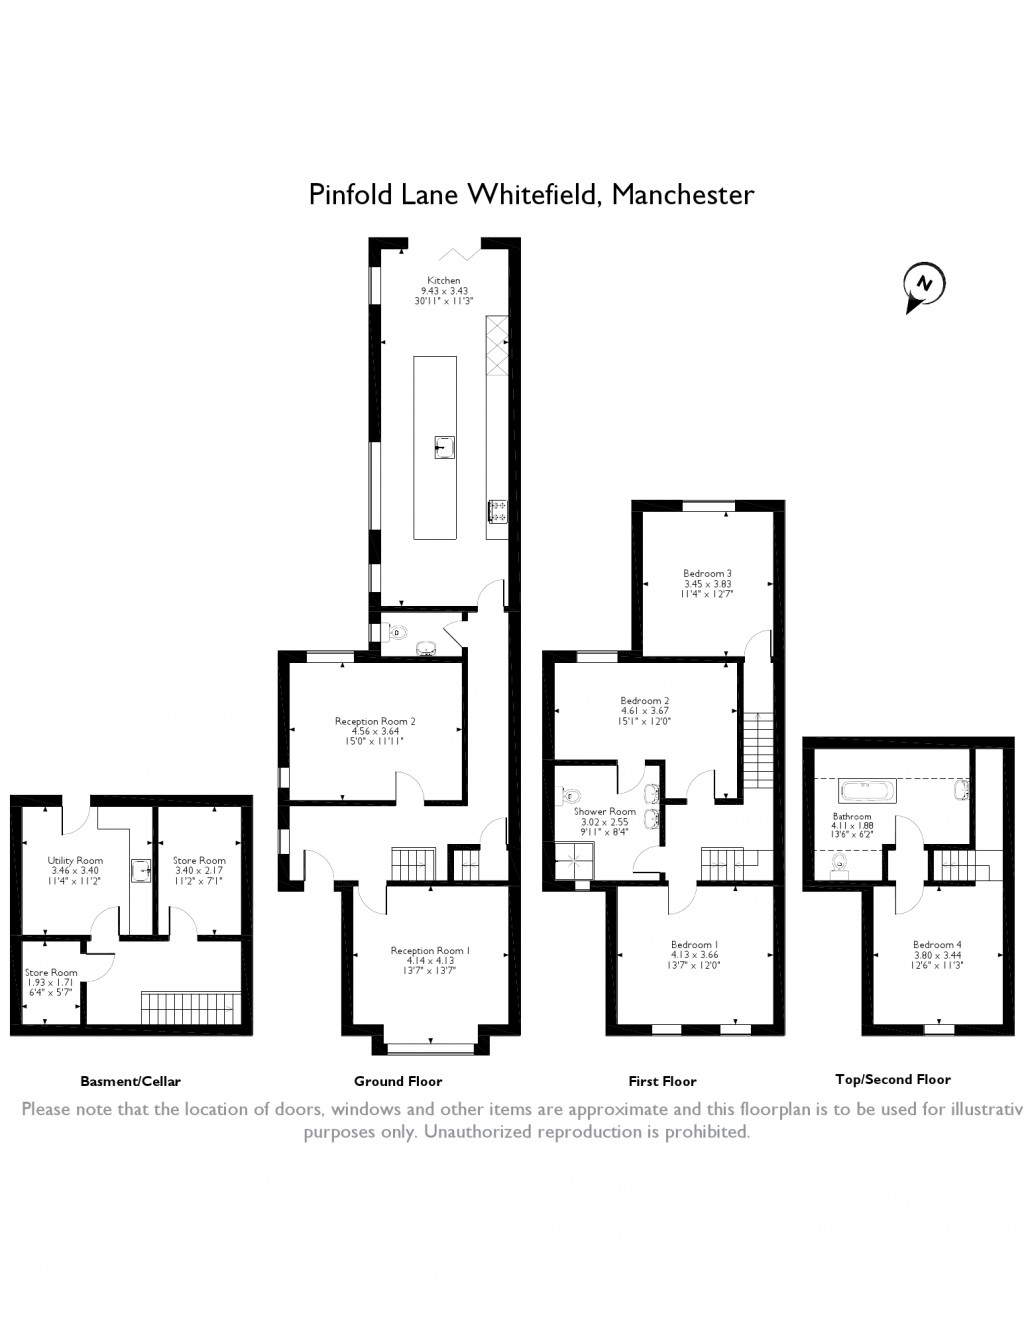 4 Bedrooms Semi-detached house for sale in Pinfold Lane, Whitefield, Manchester M45